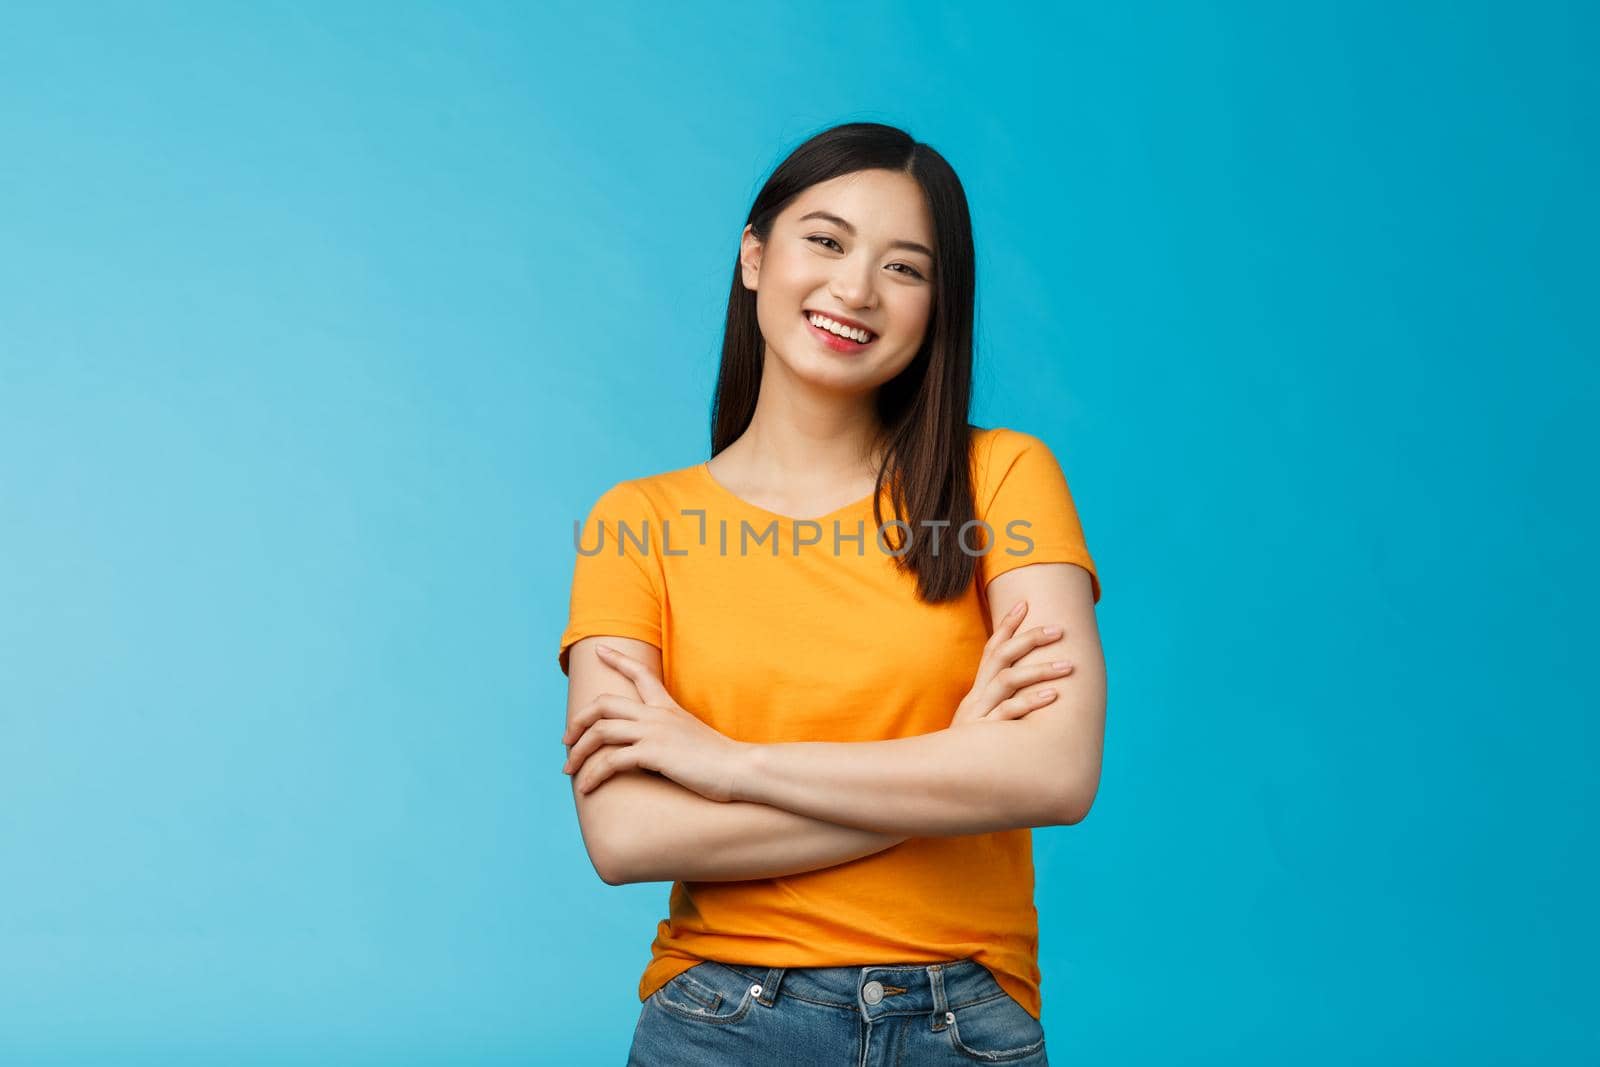 Cheerful friendly asian woman with dark short haircut smiling broadly enthusiastic conversation, talking you casually, cross arms chest confident pose, laughing carefree, stand blue background.